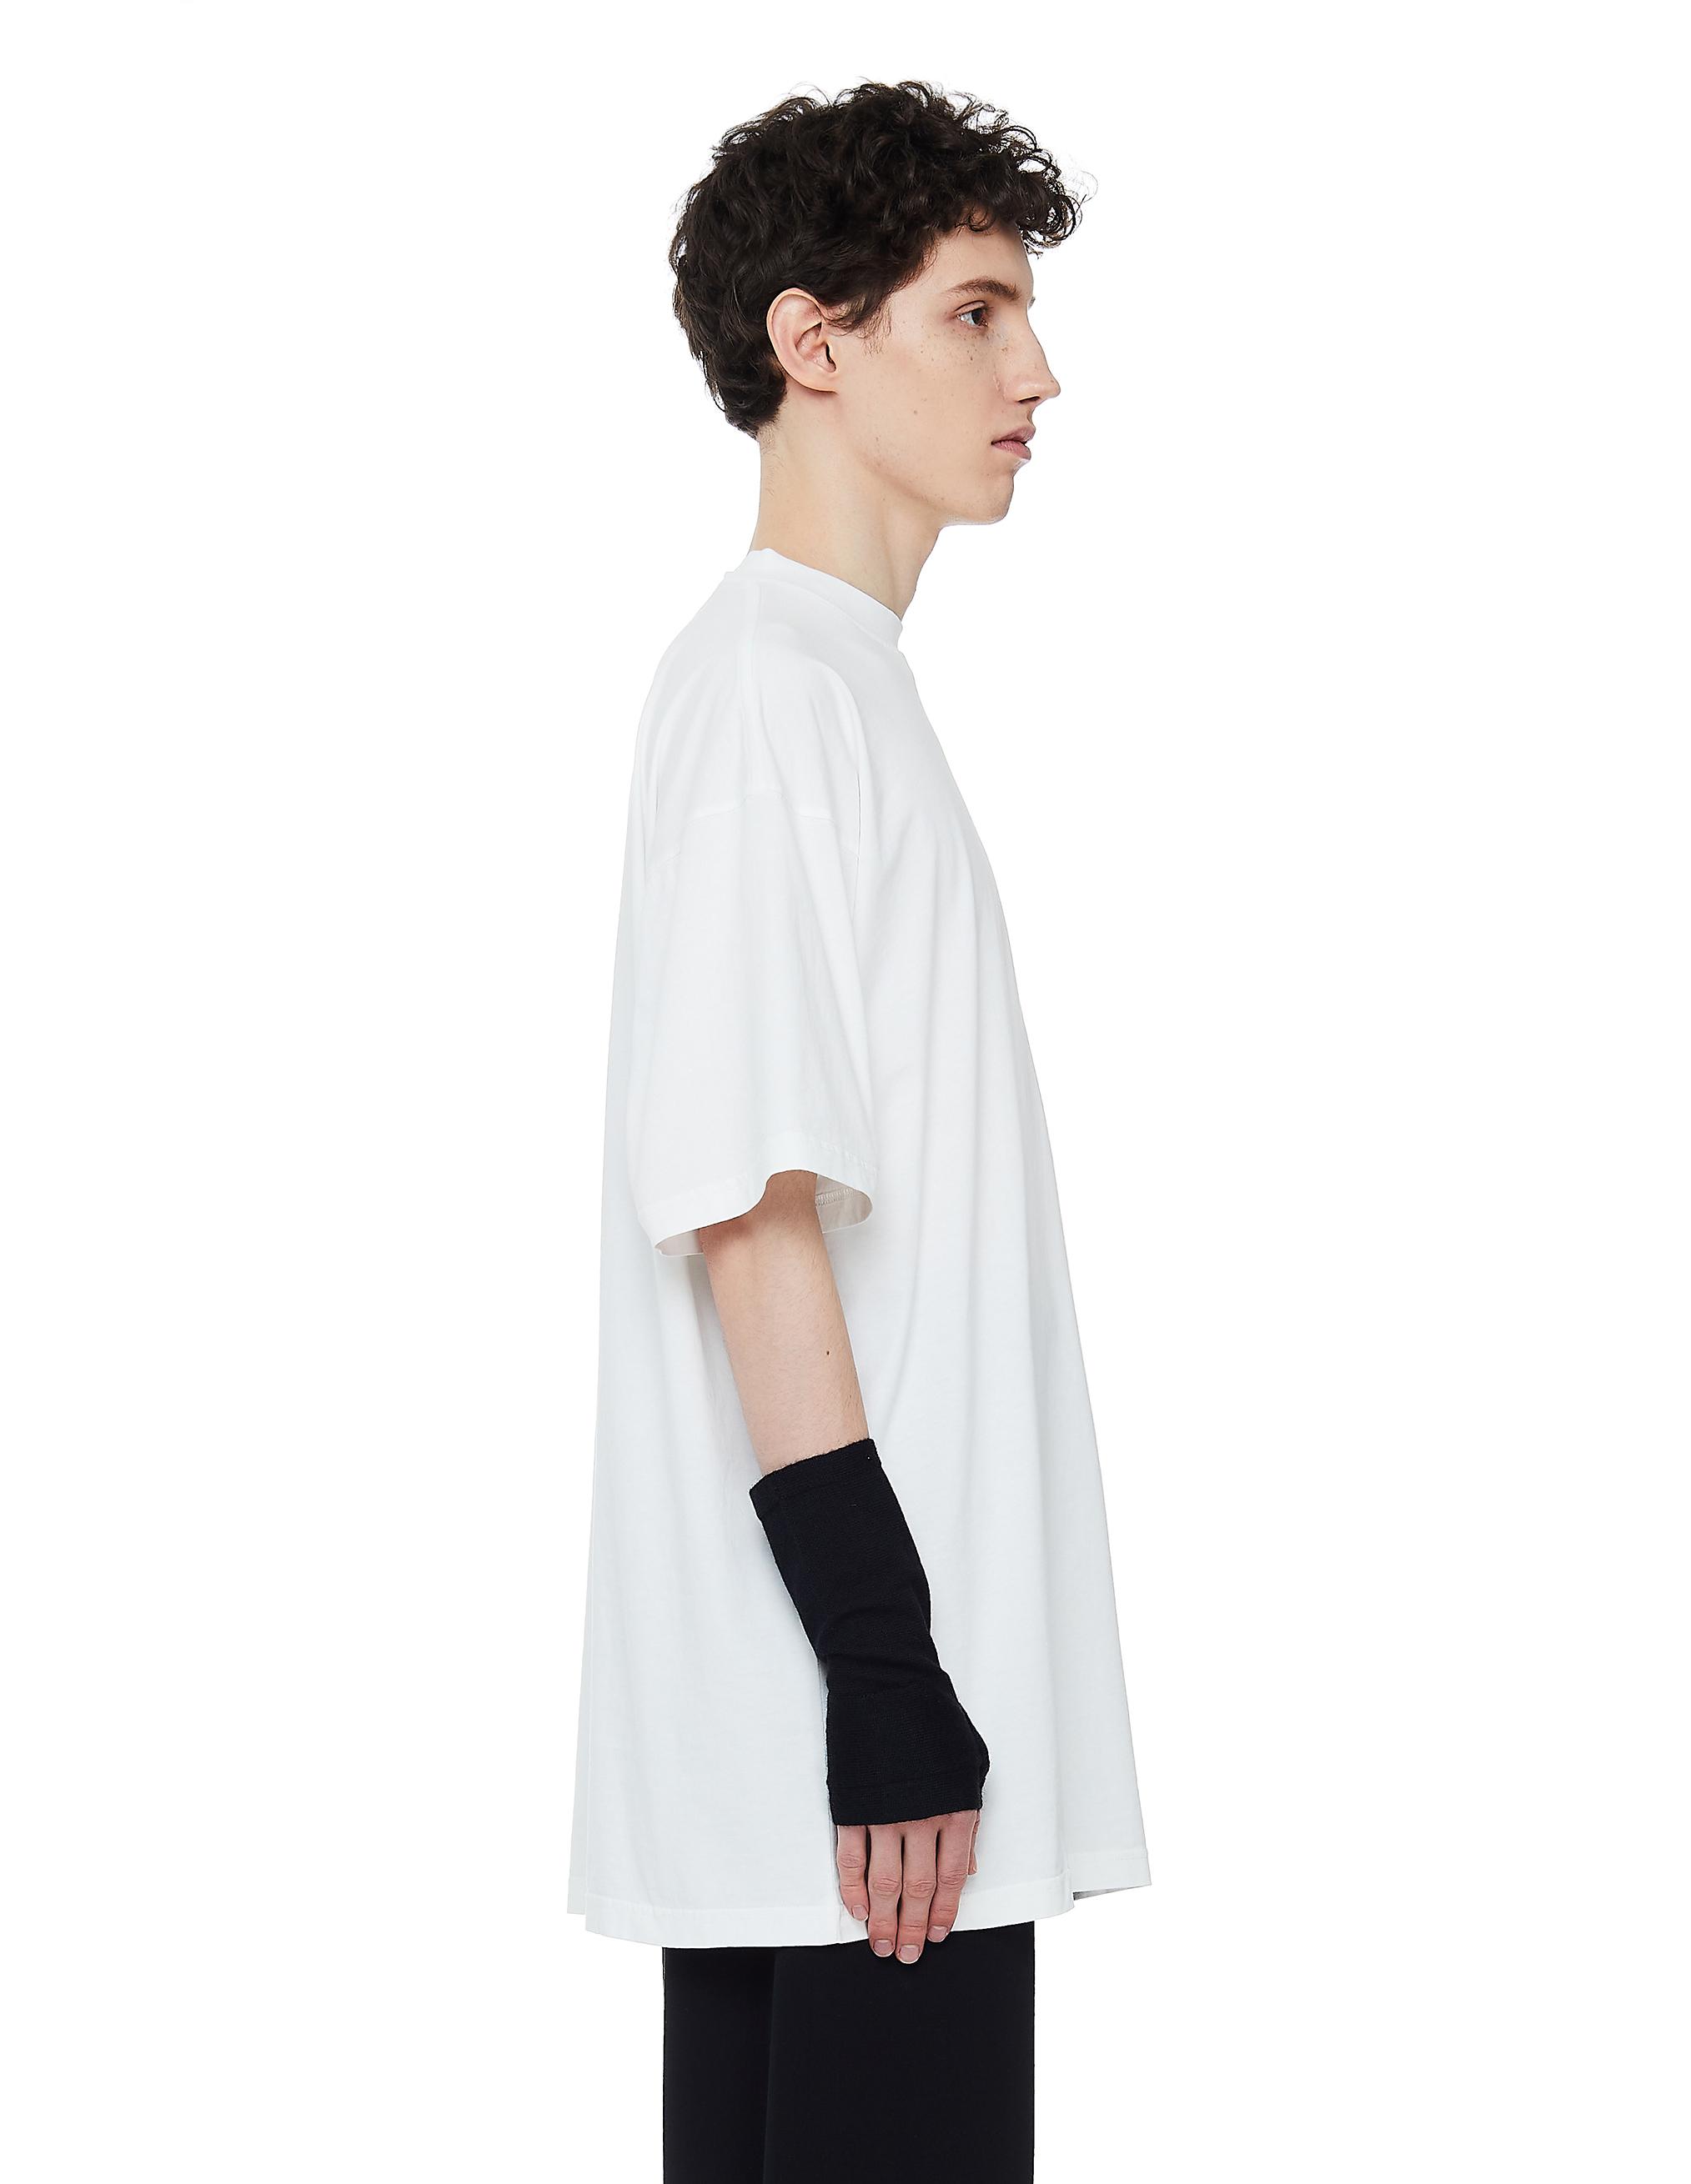 Vetements Cotton Logo & Patch T-shirt in White for Men - Lyst